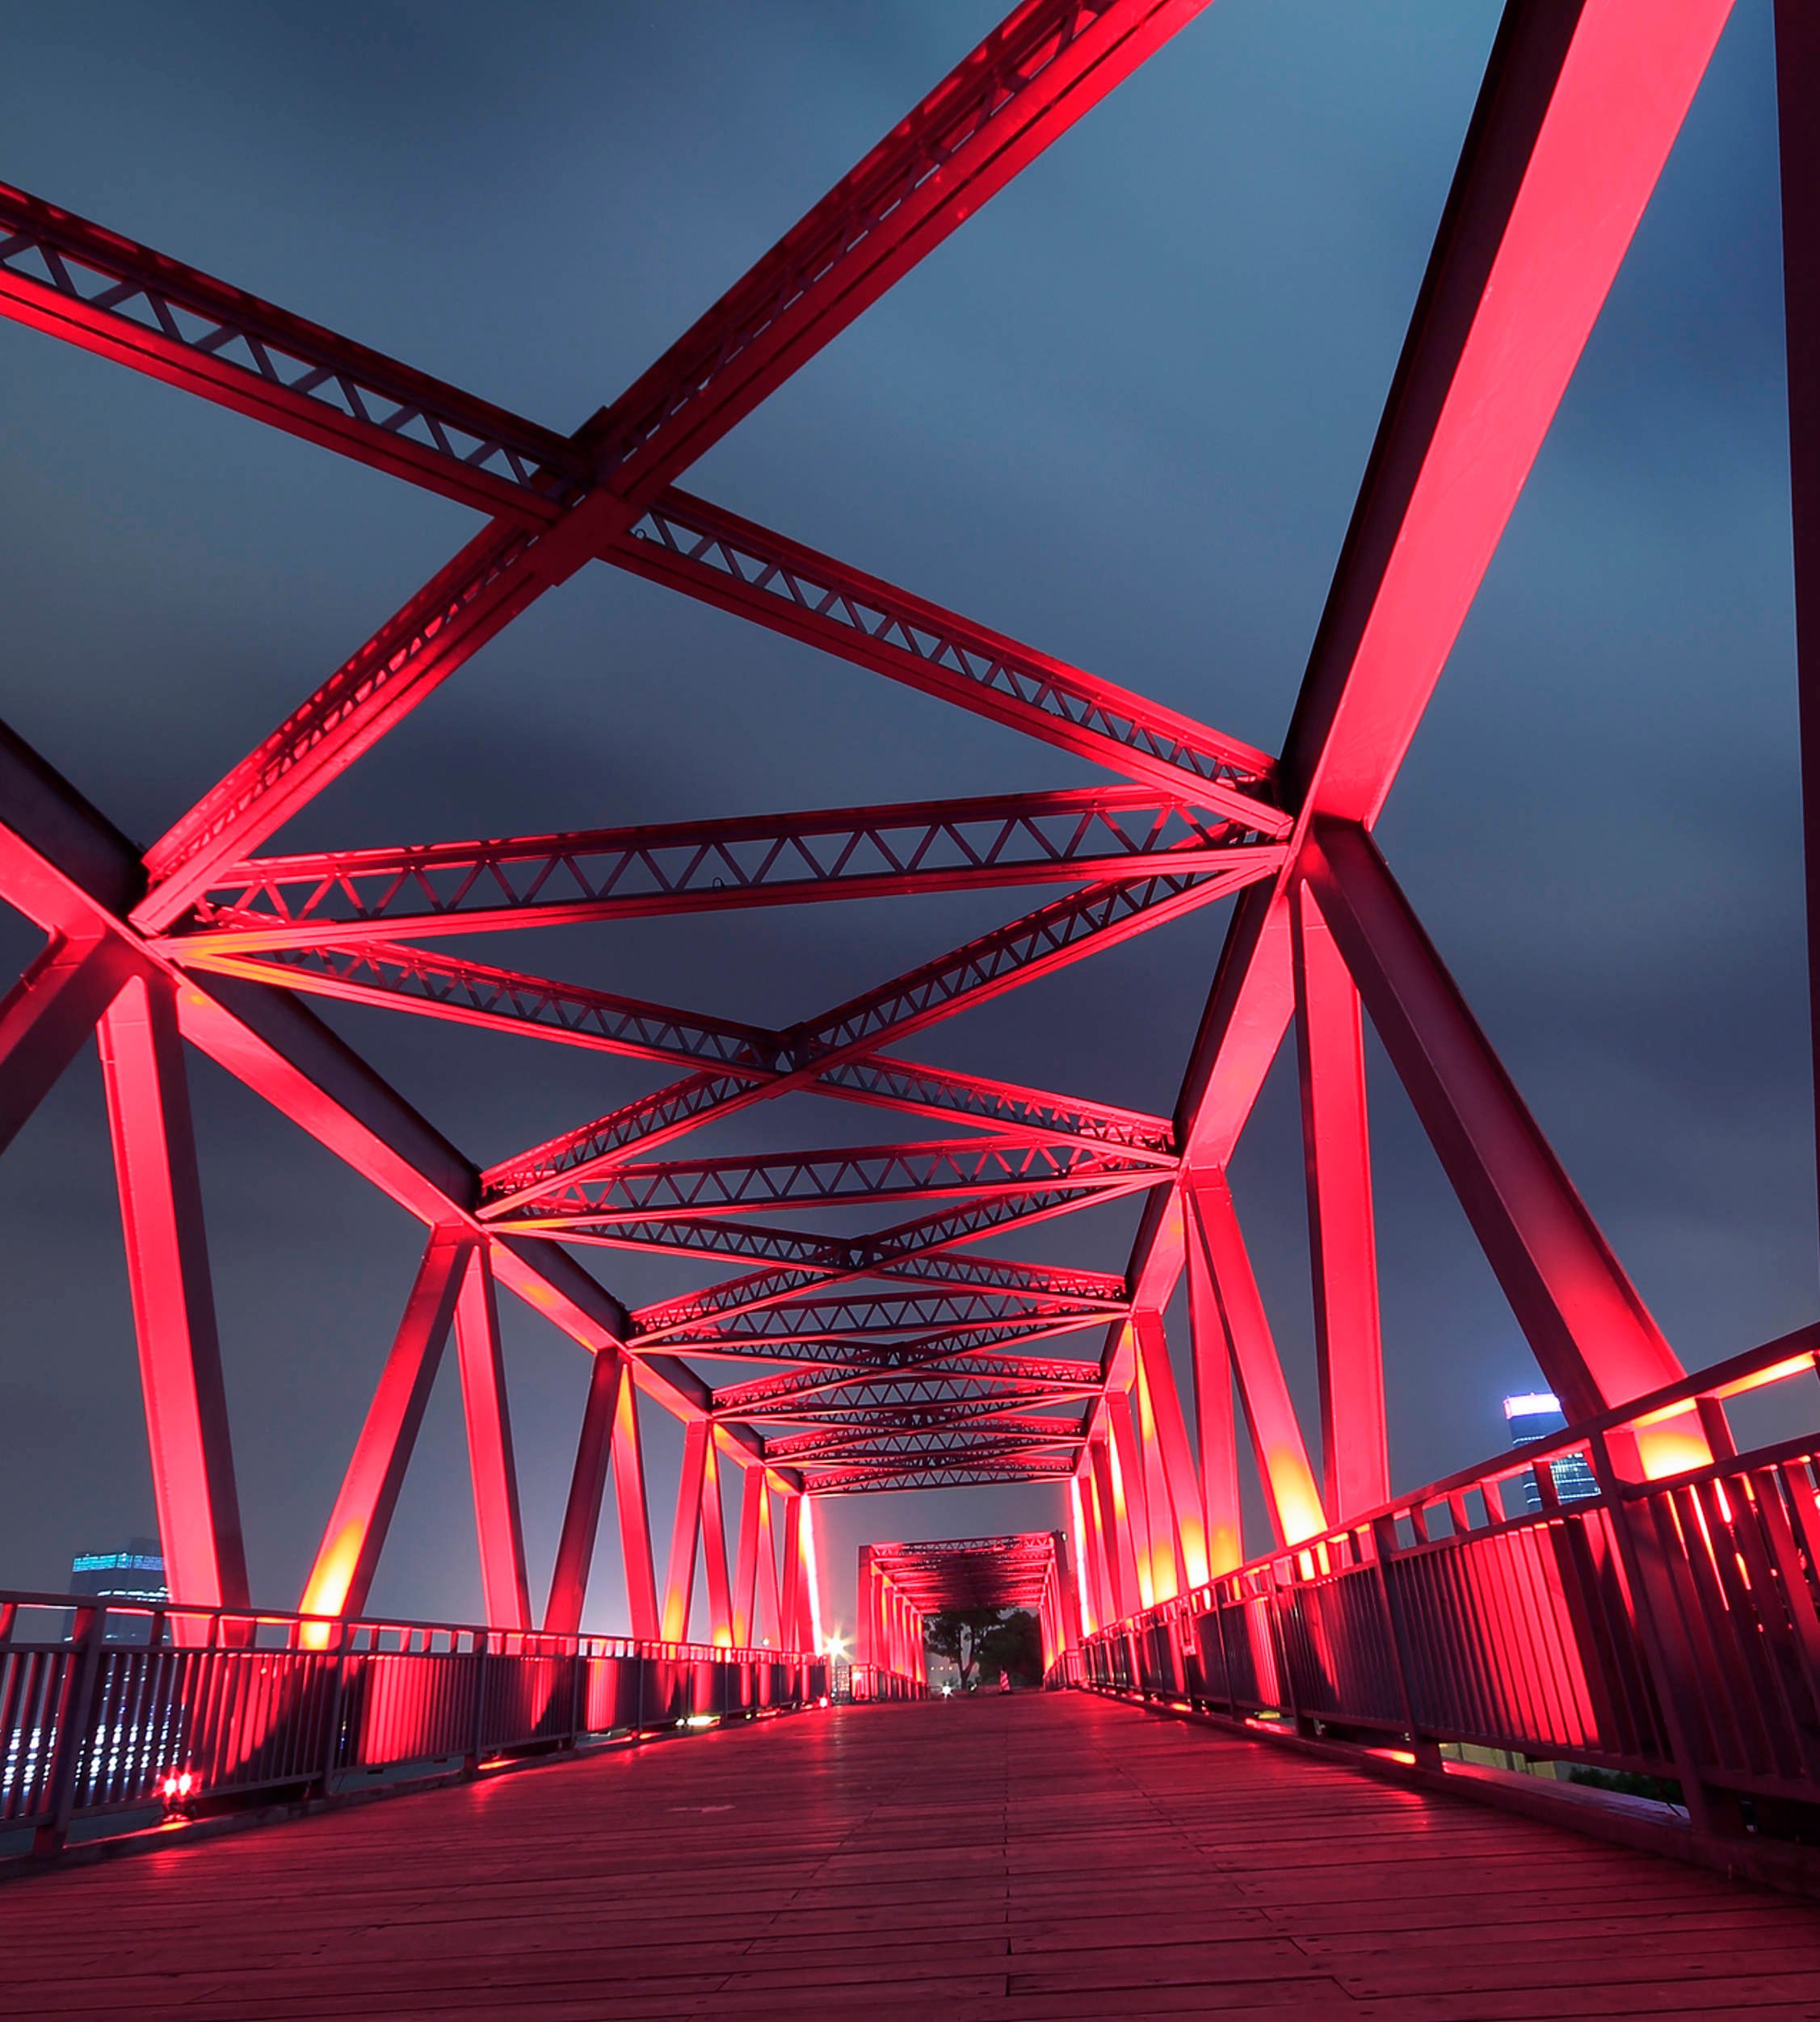 Steel bridge lightened up by red light in the night time